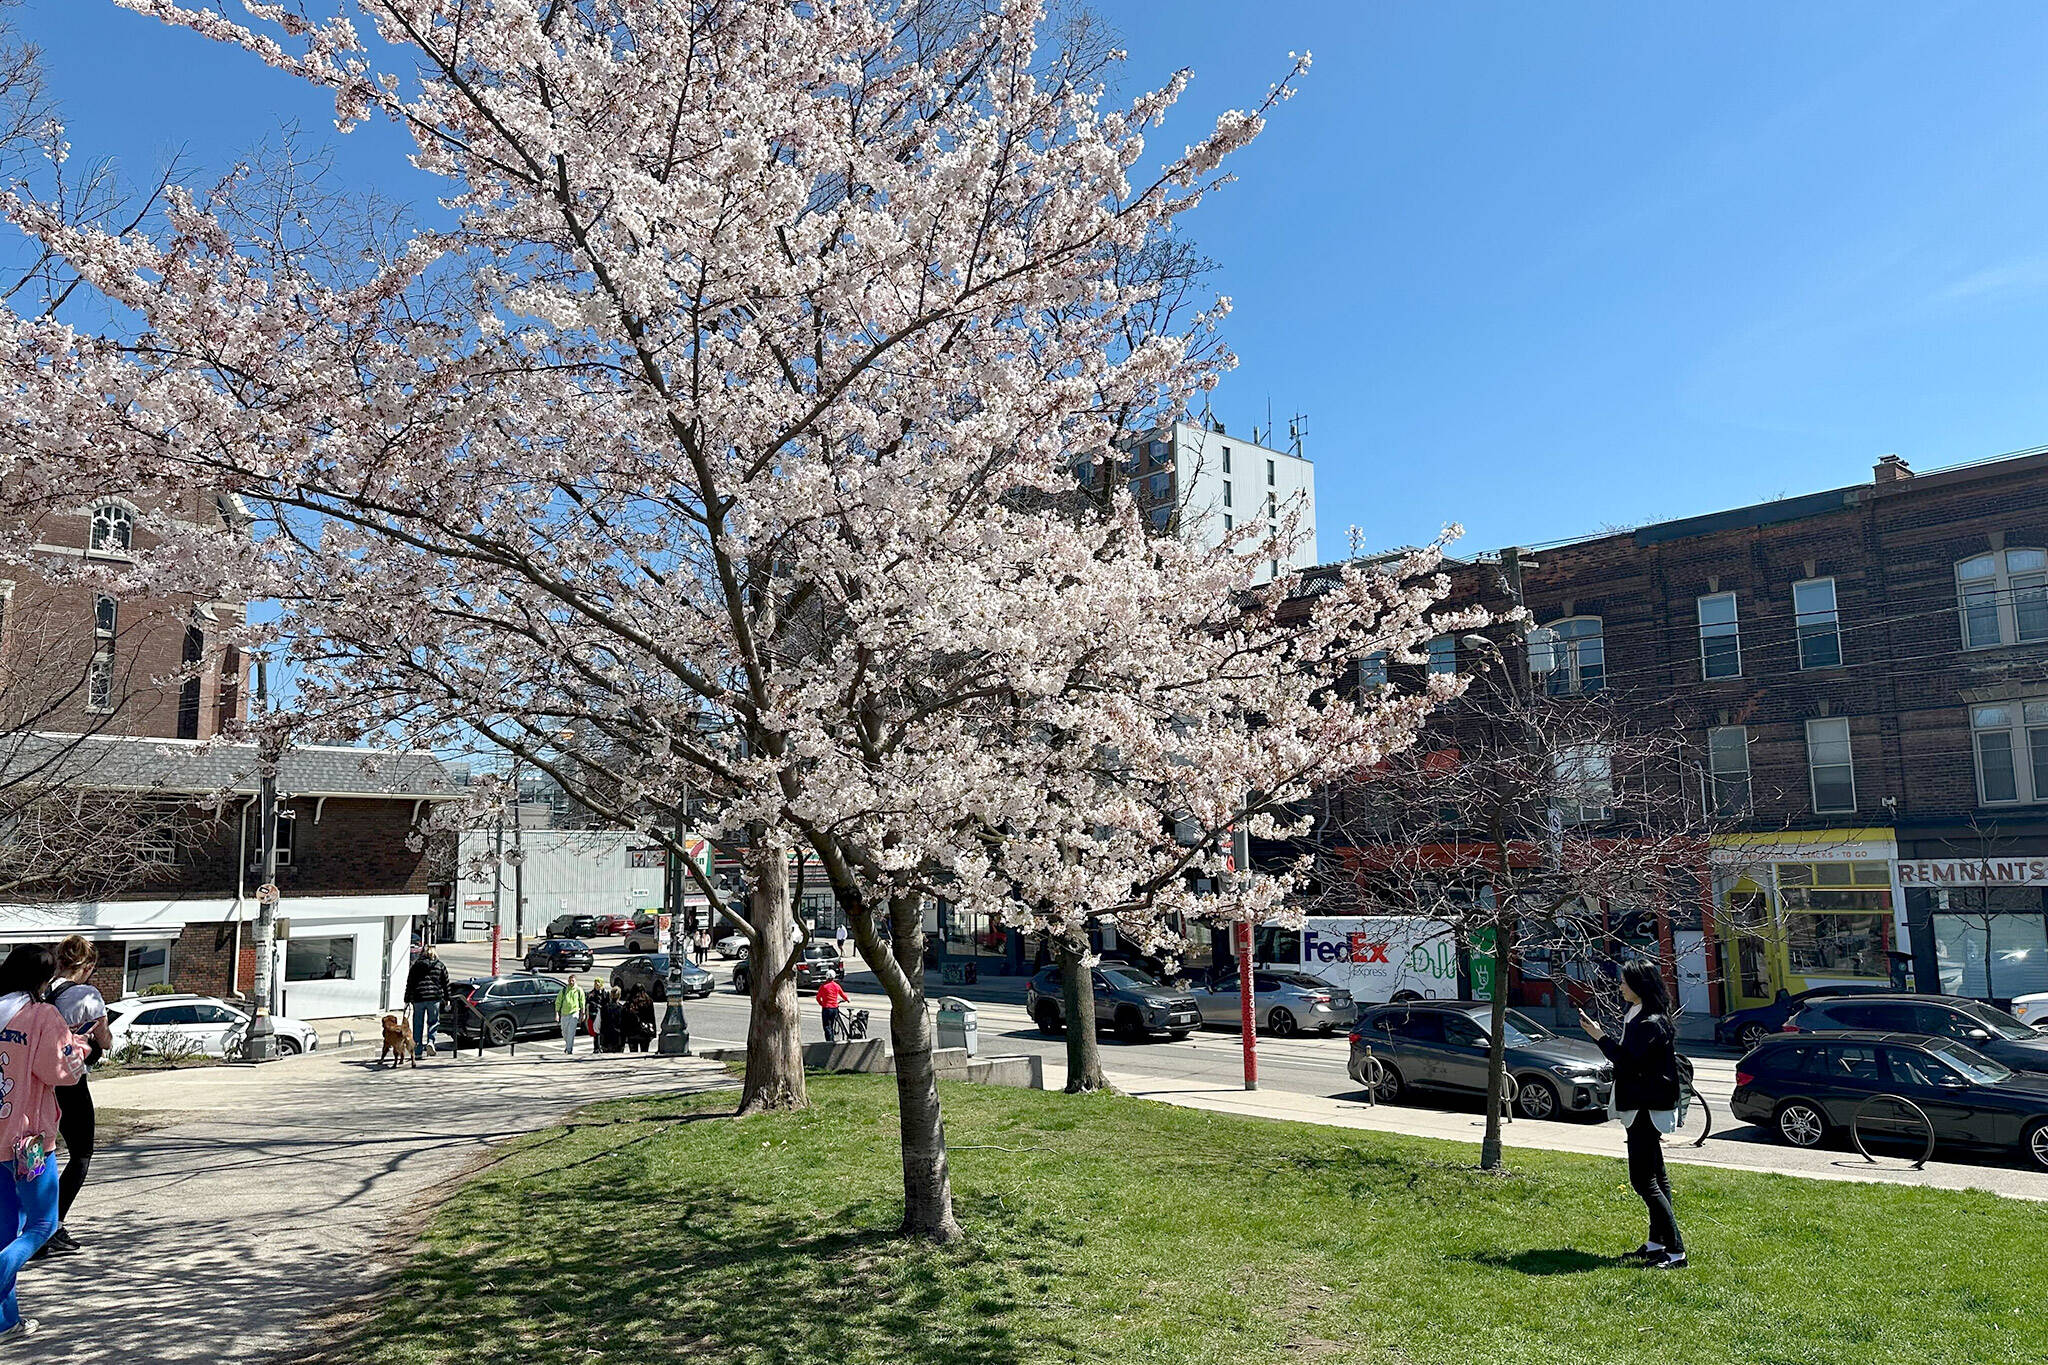 The cherry blossoms have started to bloom at Trinity Bellwoods Park